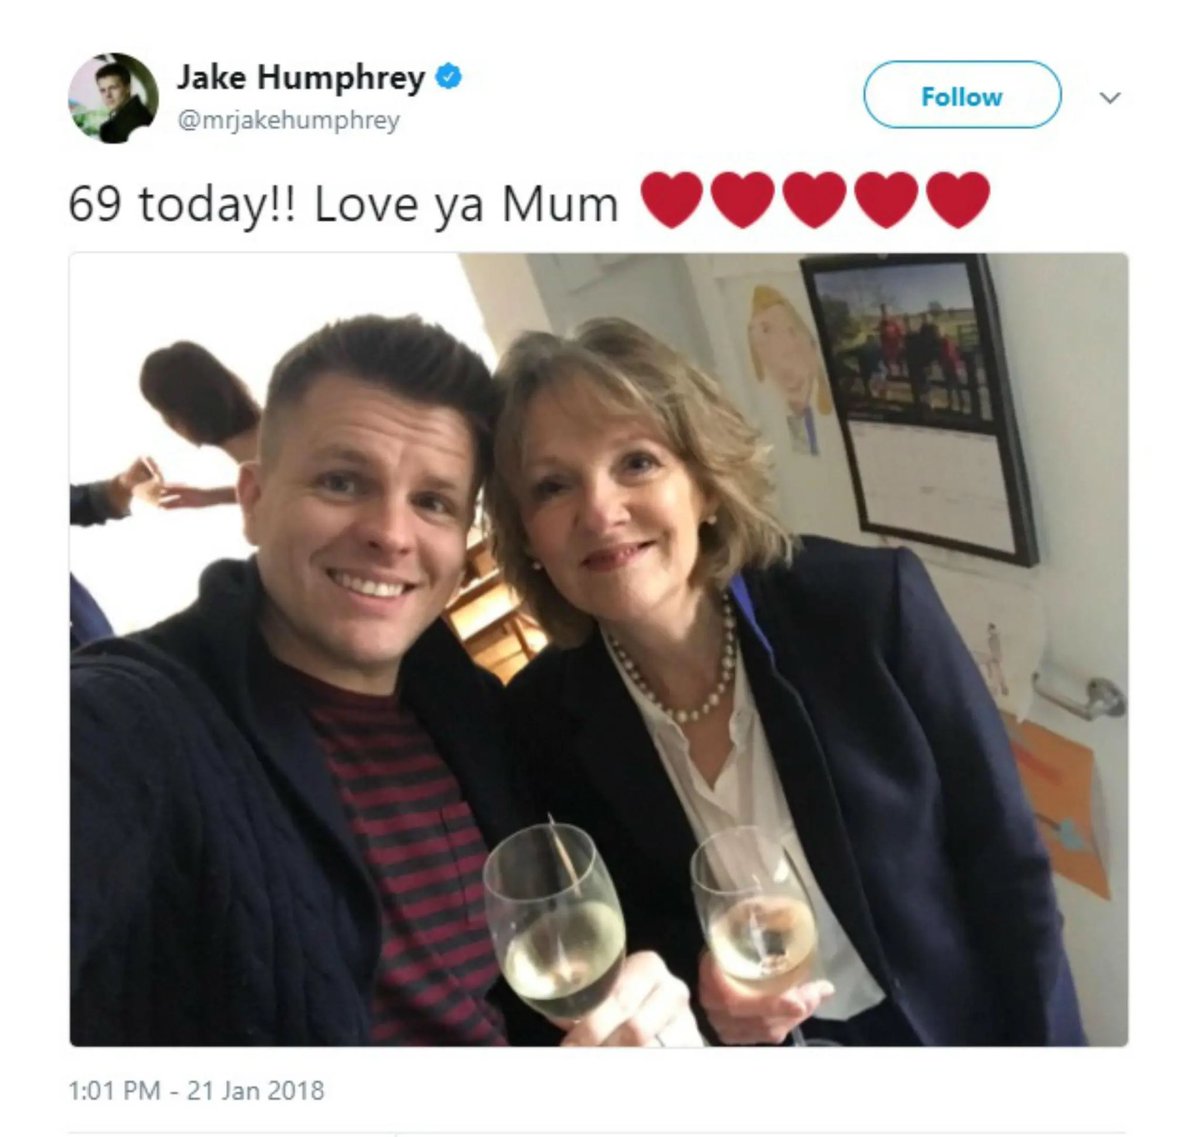 Jake really likes to treat his mum on mother’s day.
#highperformance